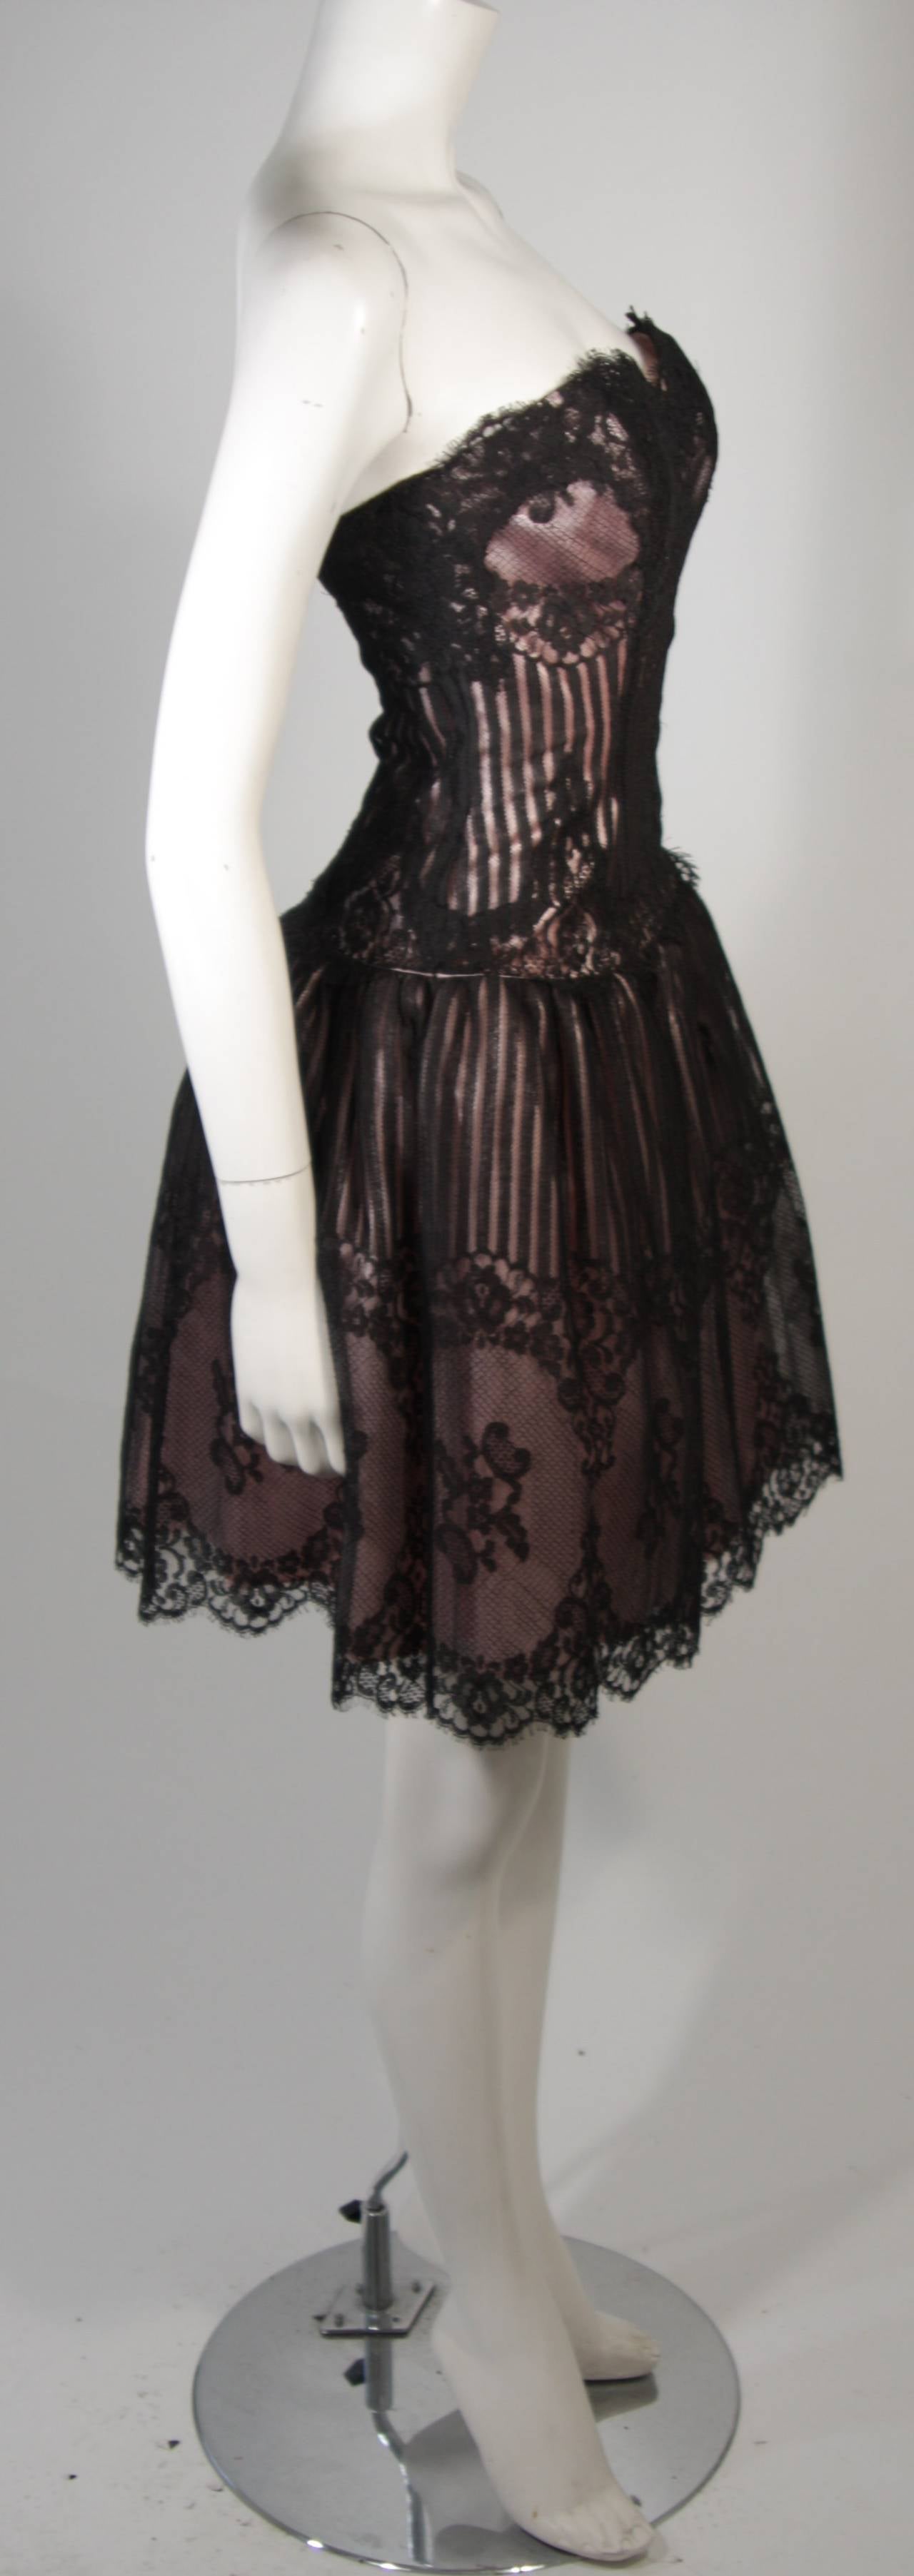 Victor Costa Strapless Black Lace Cocktail Dress with Pink Satin Size 40 In Excellent Condition For Sale In Los Angeles, CA